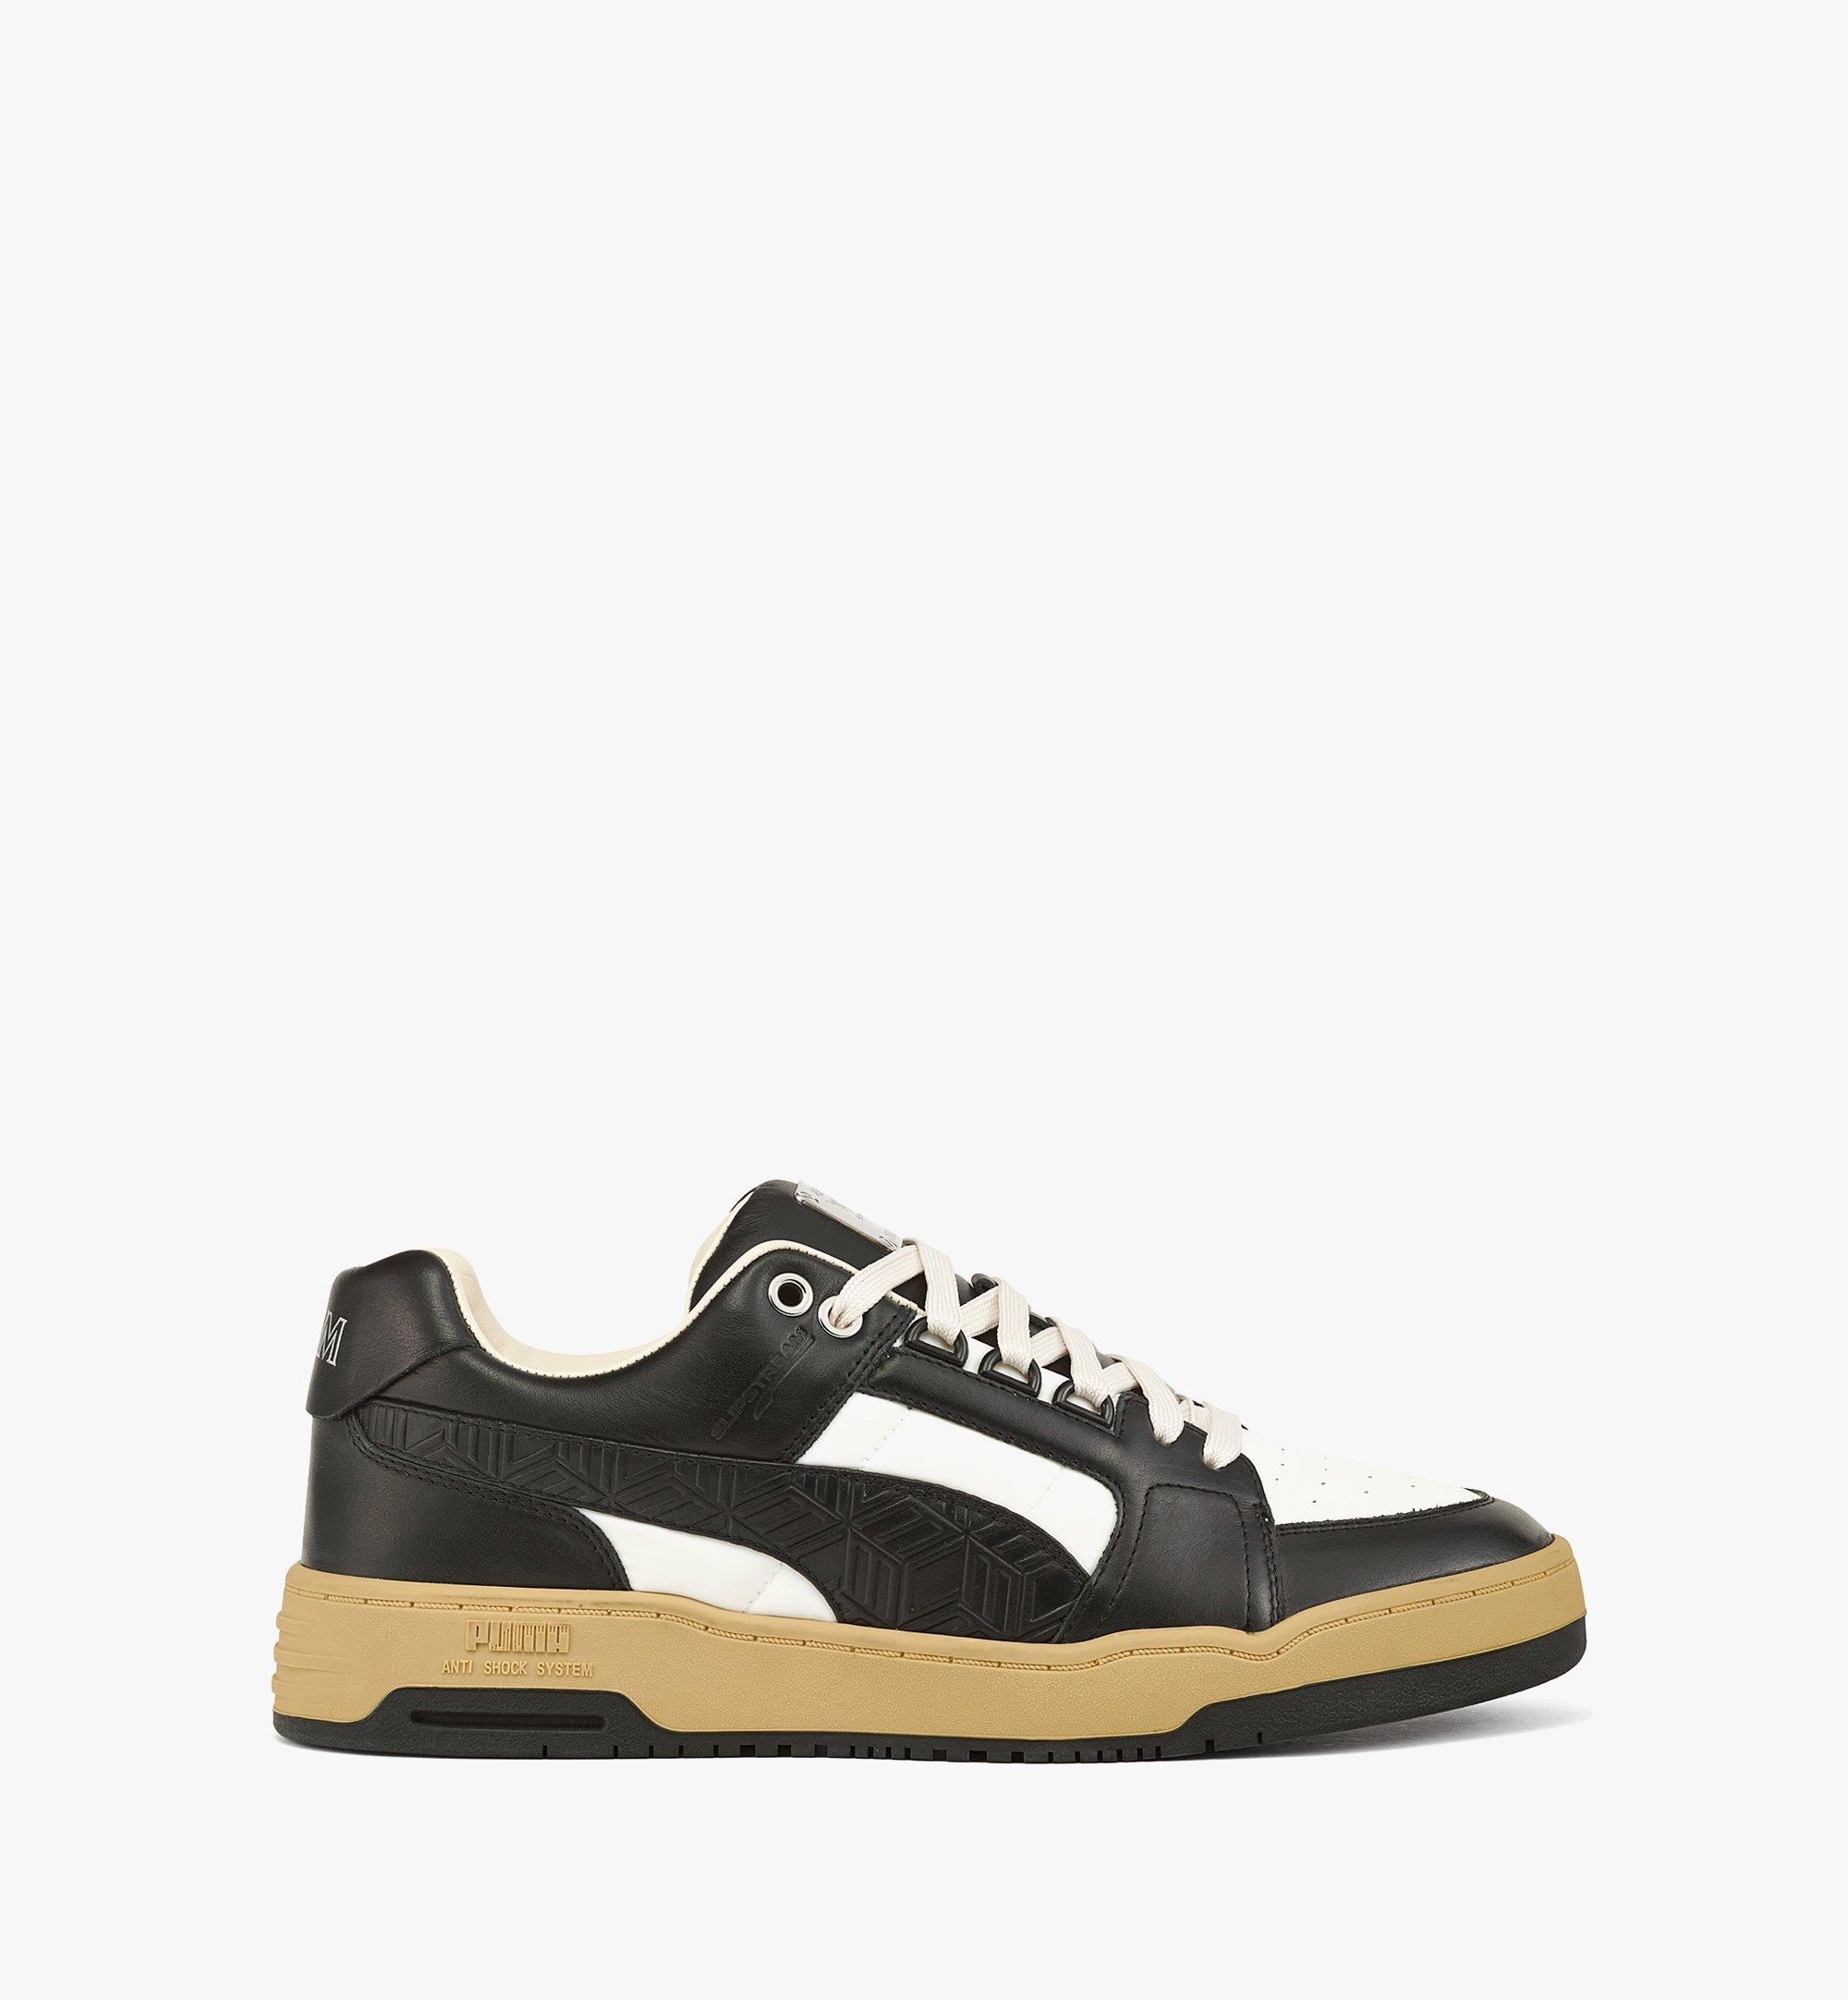 MCM x PUMA Slipstream Sneakers in Cubic Leather - 5